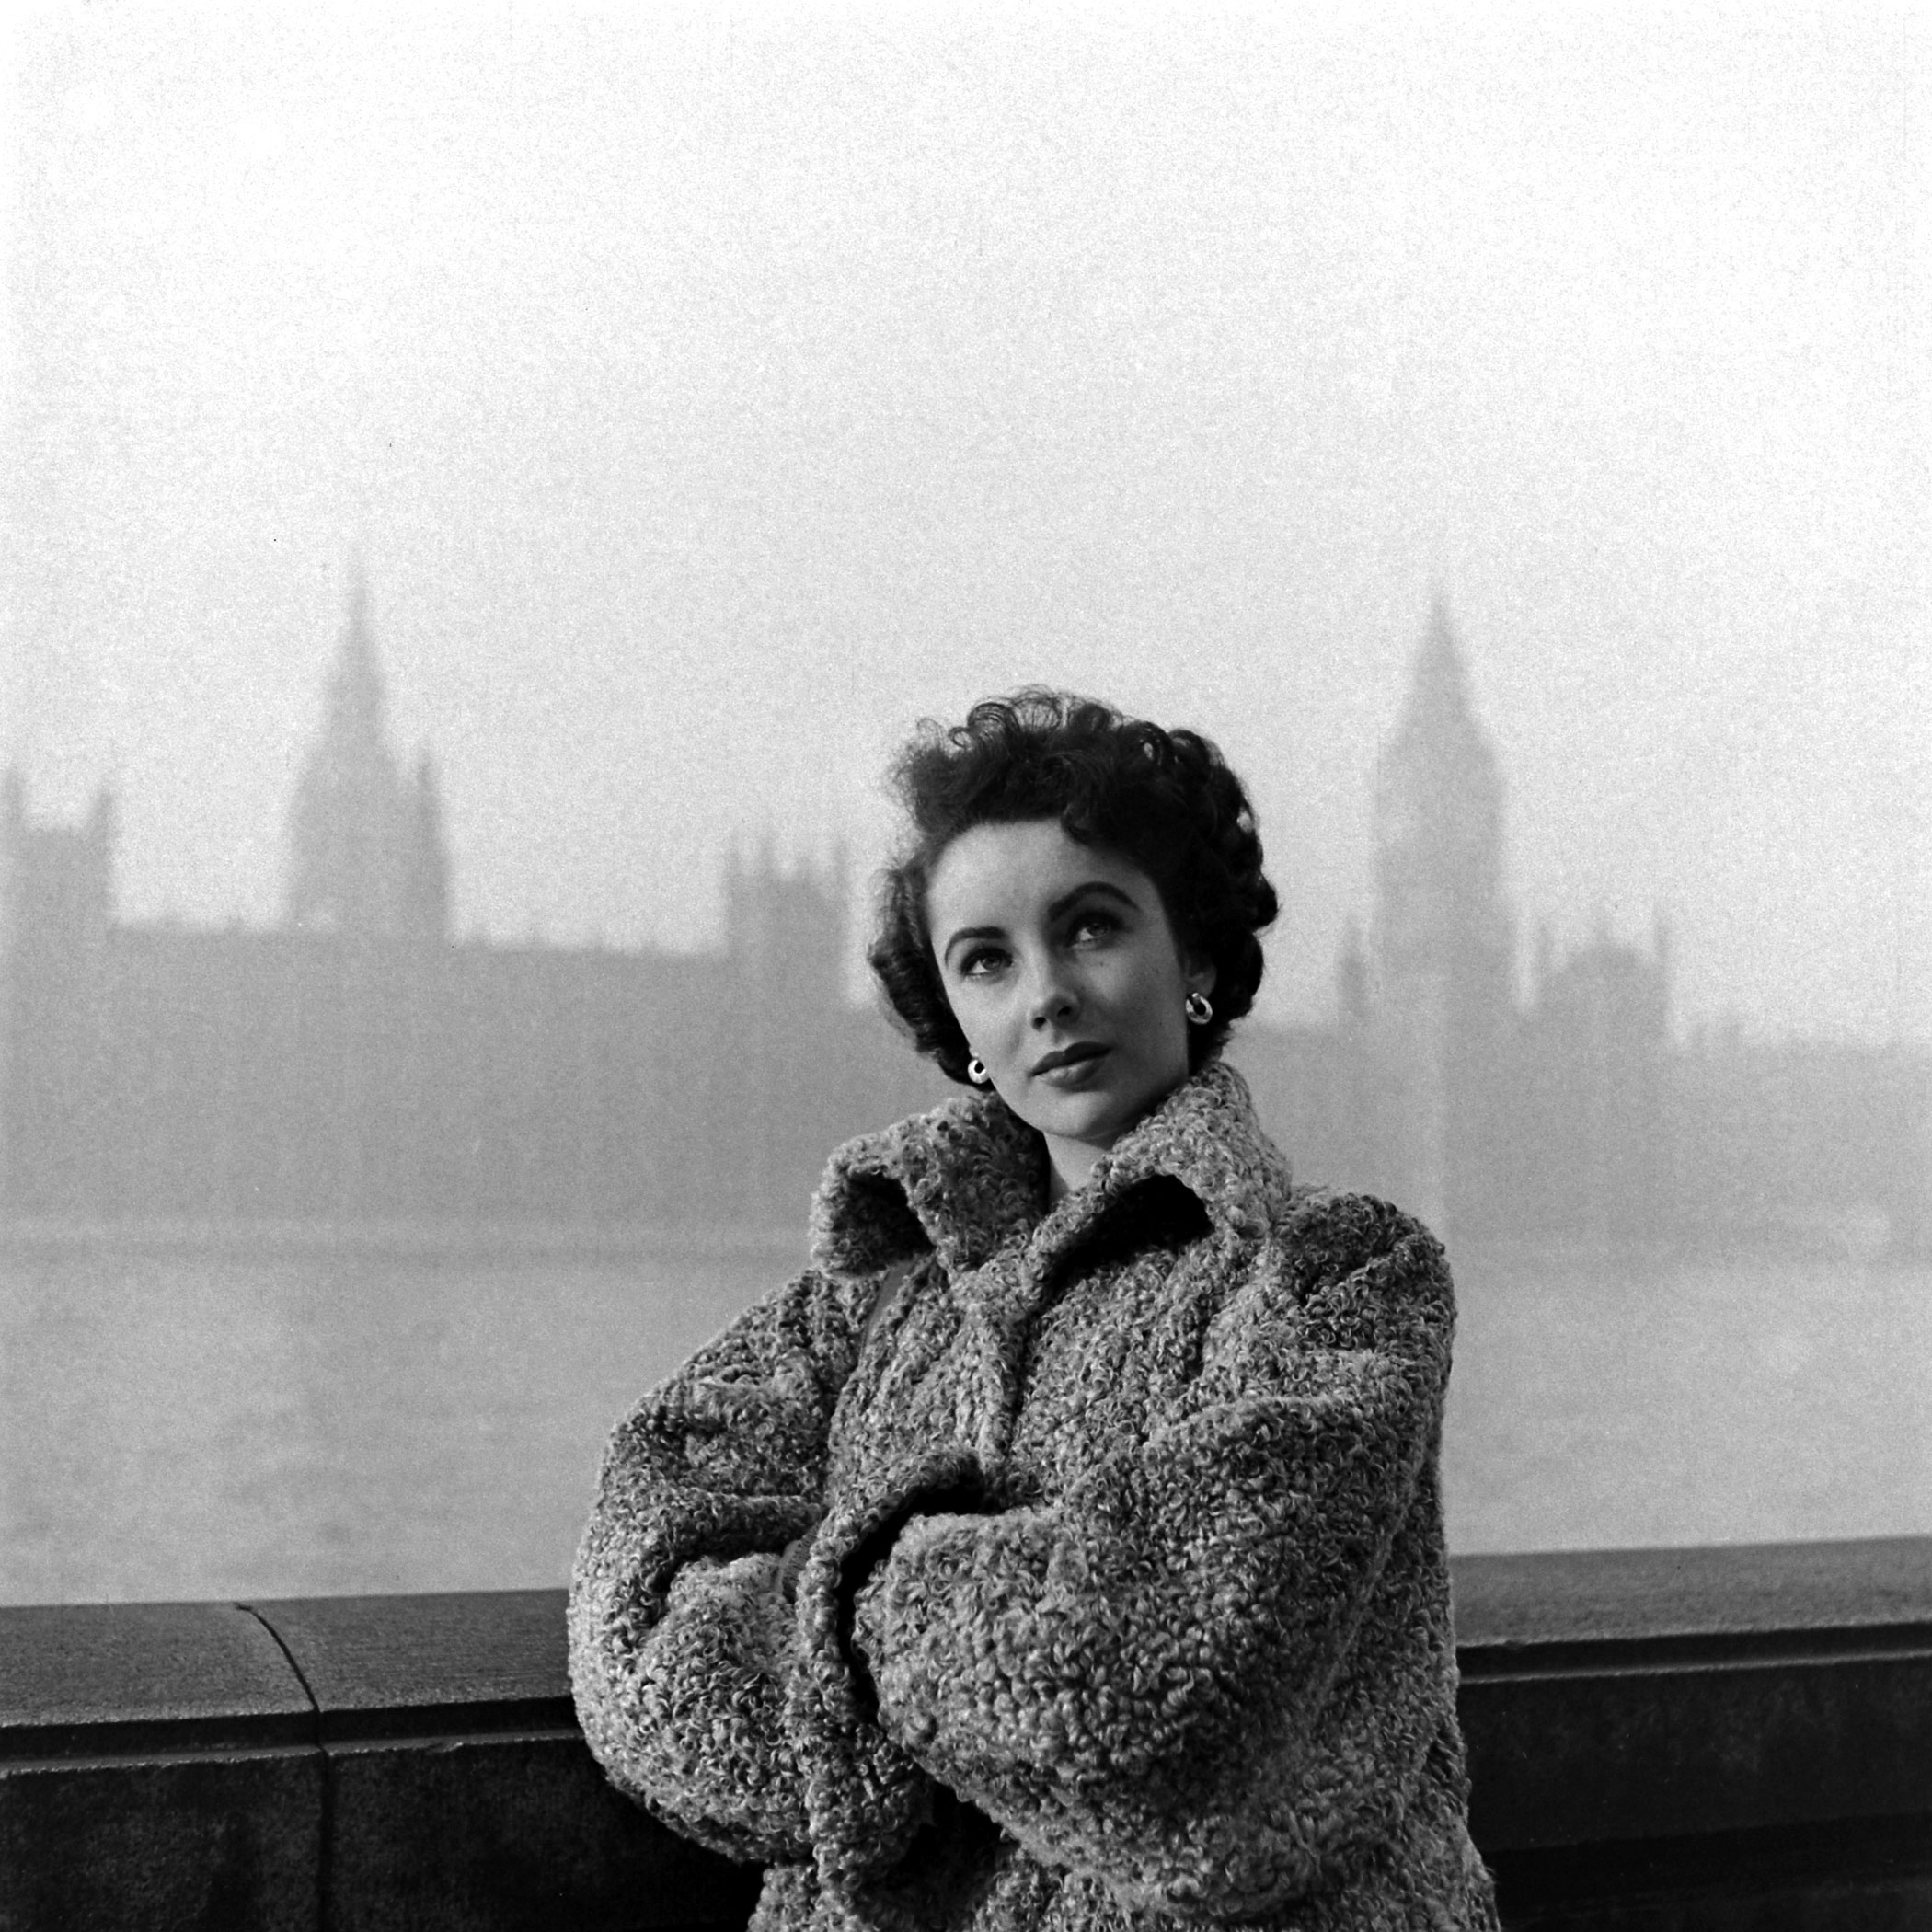 Elizabeth Taylor with West Point in the background, 1948